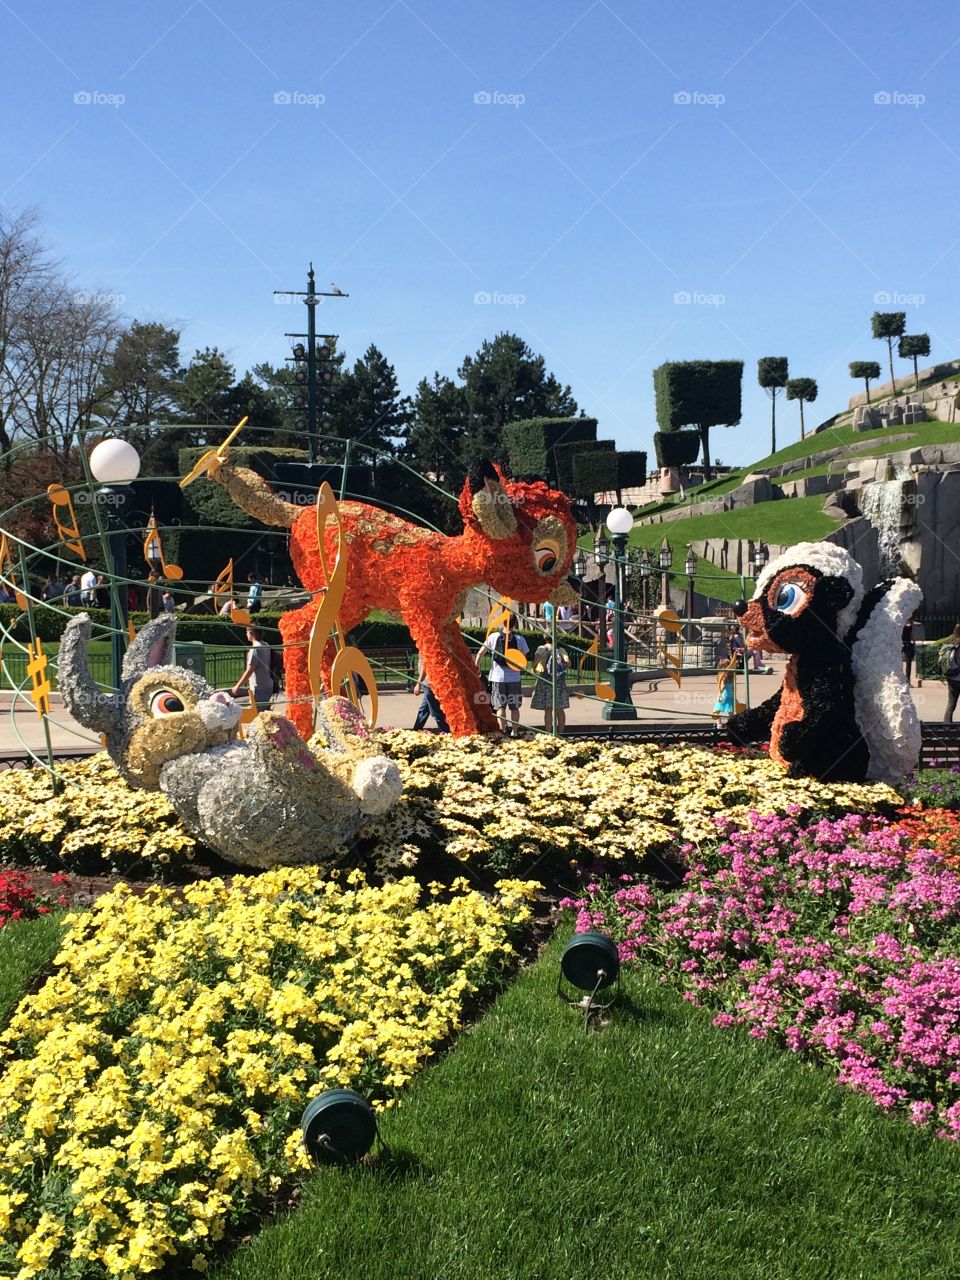 Disneyland Spring Flowers. Bambi, Thumper and Flower Swing into Spring